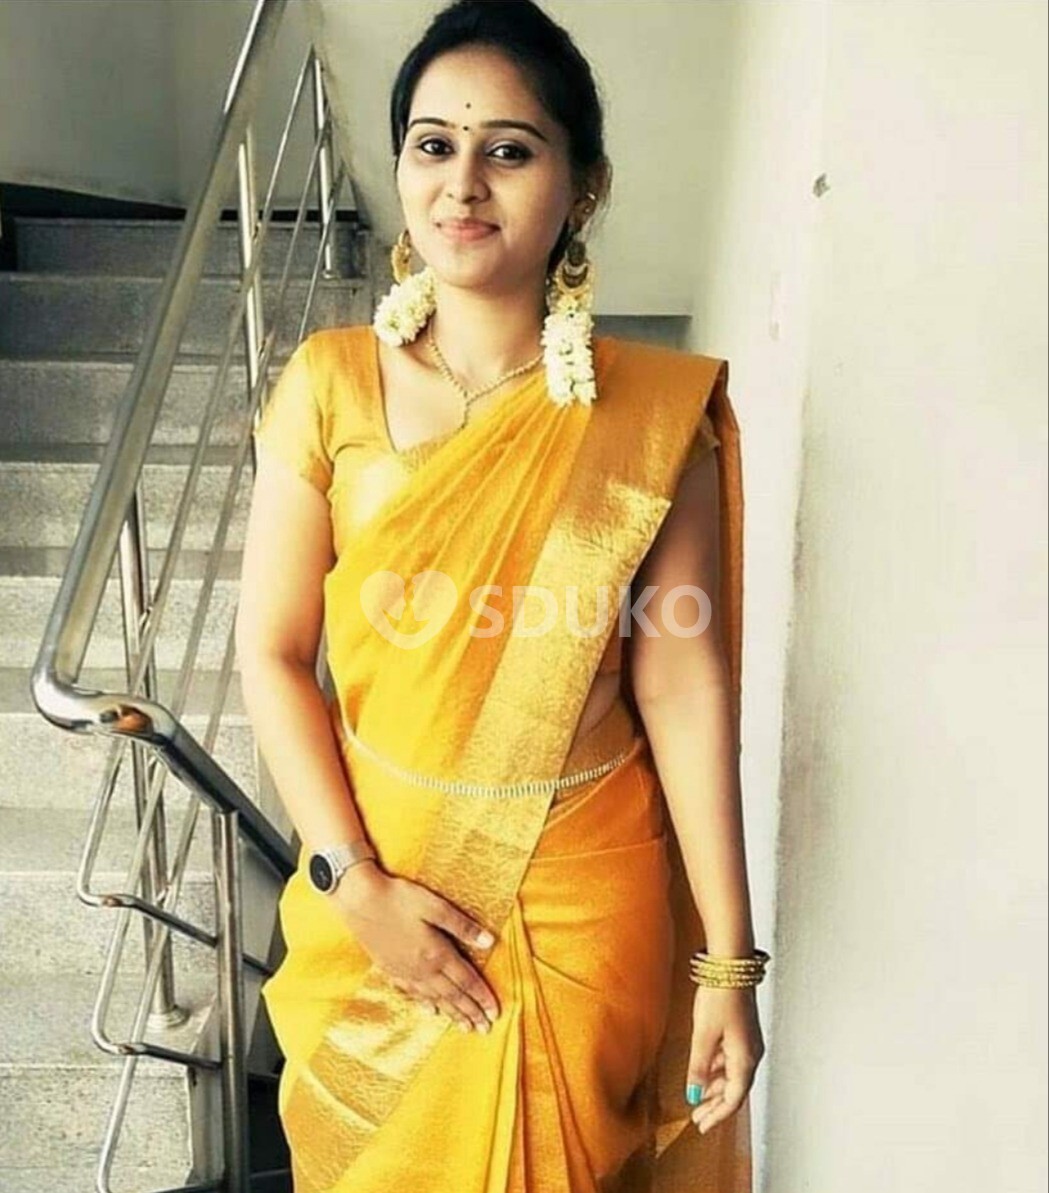 TODAY GUNTUR CALL ME DIVYA LOW PRICE UNLIMITED SHOOT 100% GENUINE SEXY VIP CALL GIRLS ARE PROVIDED SECURE SERVICES CALL 